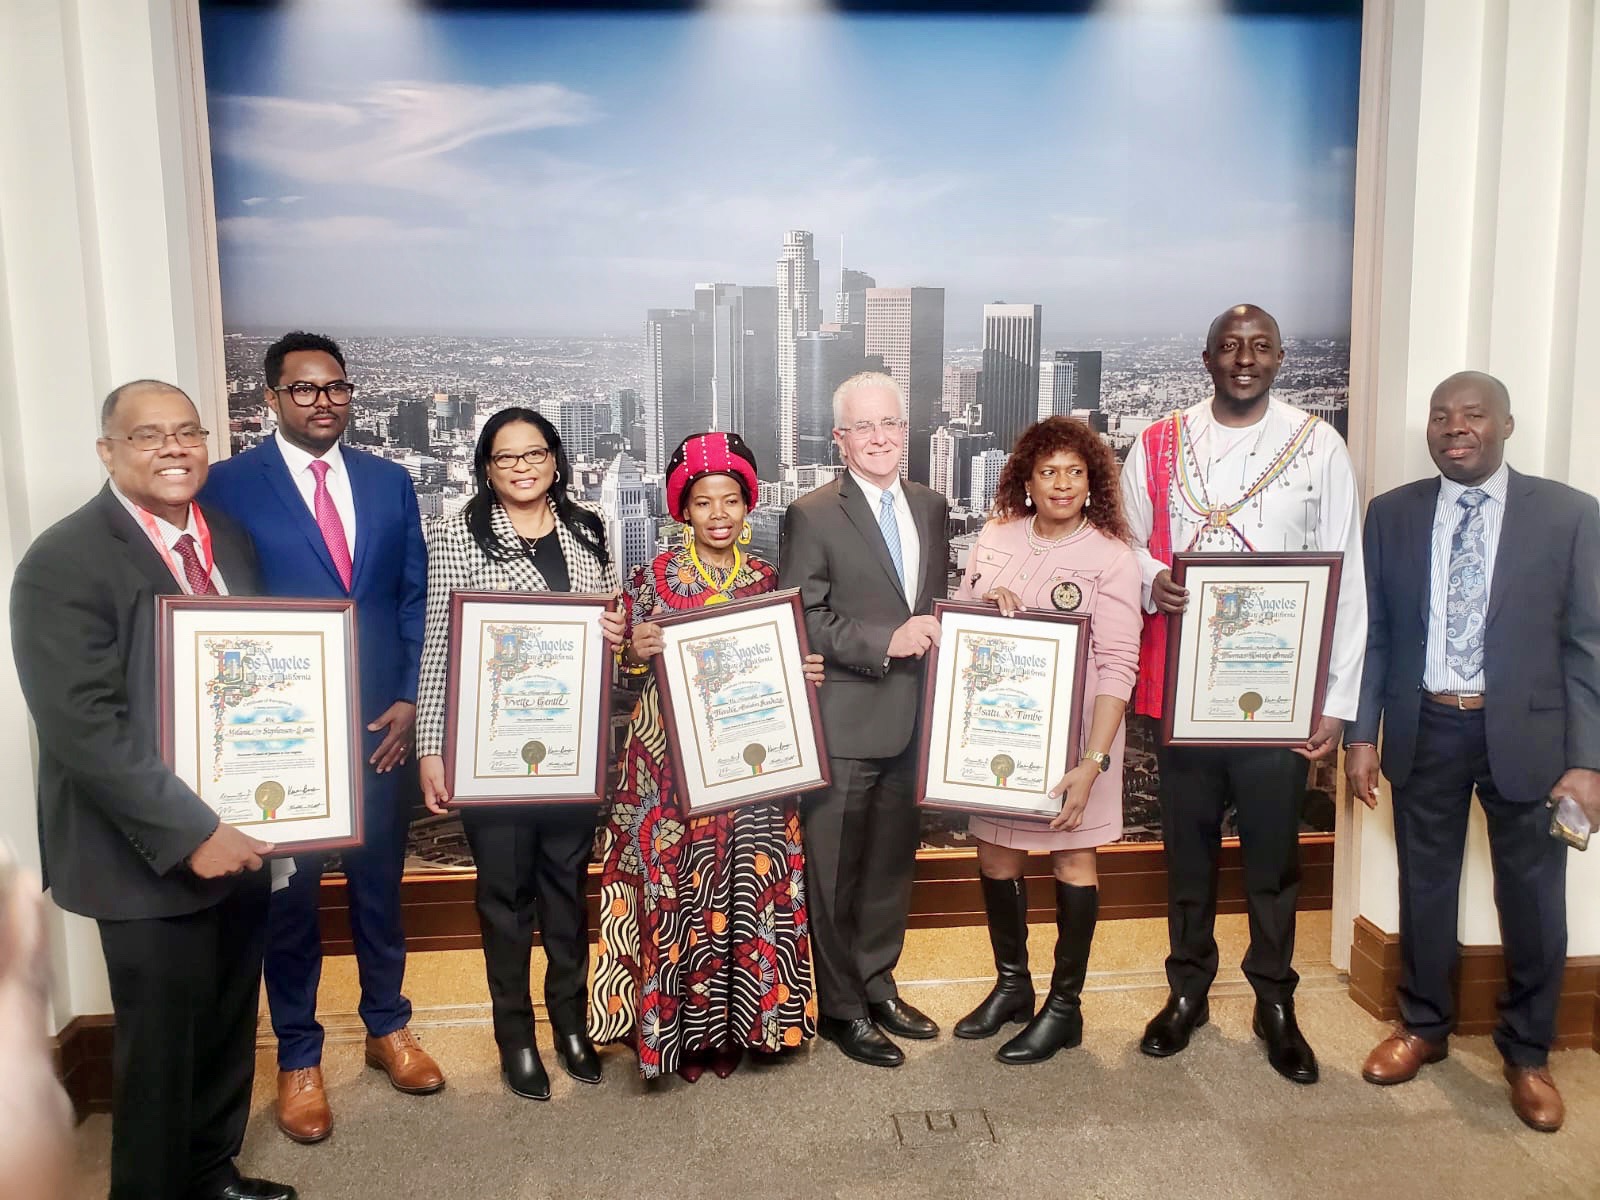 LA City Hall Hosts Inaugural Event Honoring African and Caribbean Diplomatic Corps During Black History Month